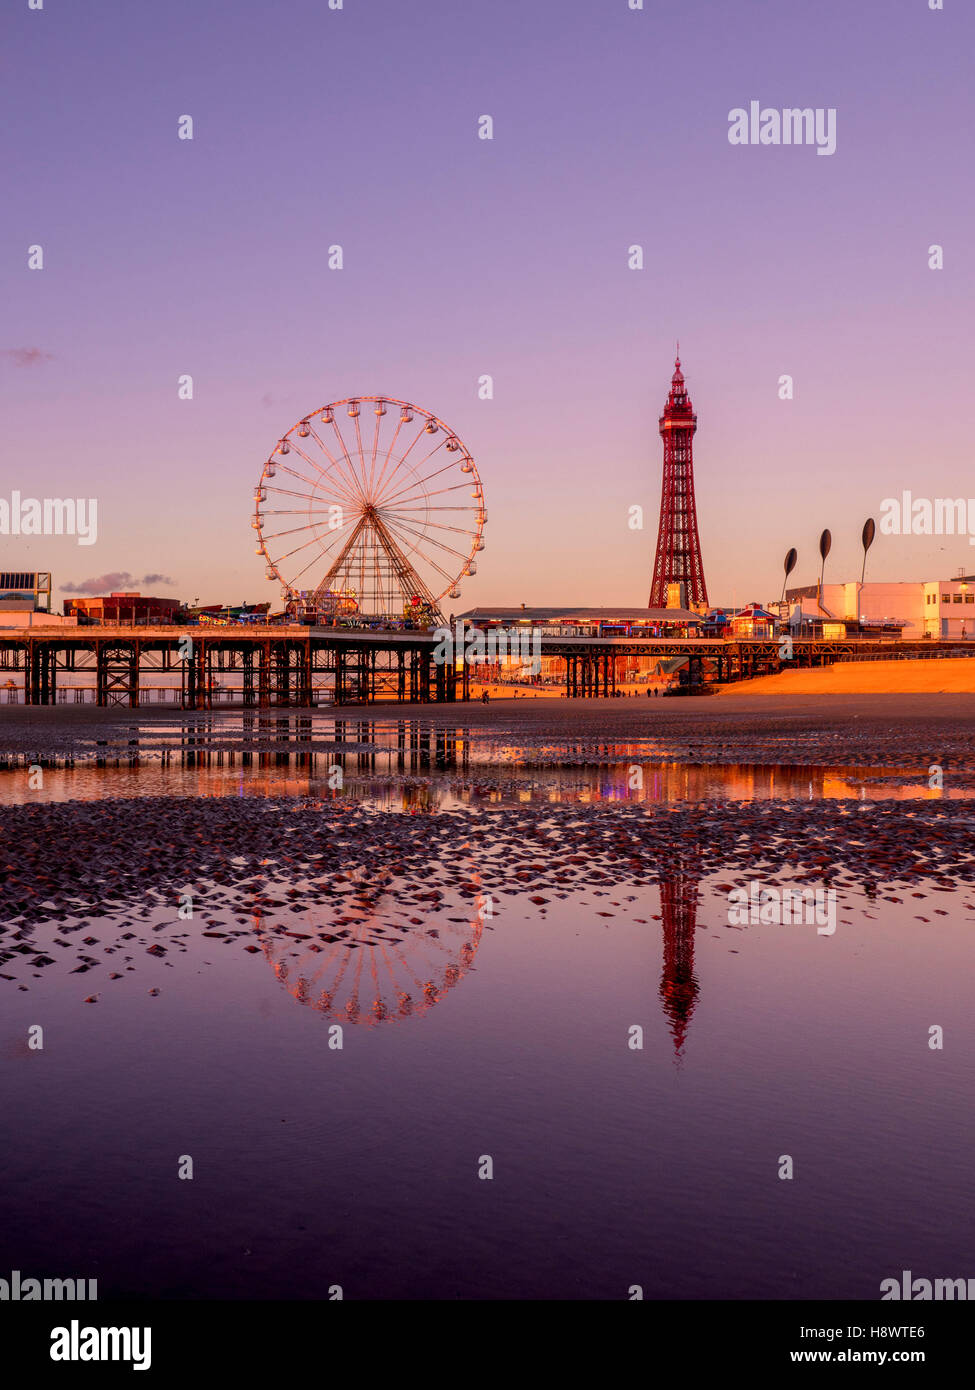 Blackpool Tower and Central Pier with reflection in water on beach at sunset, Lancashire, UK. Stock Photo